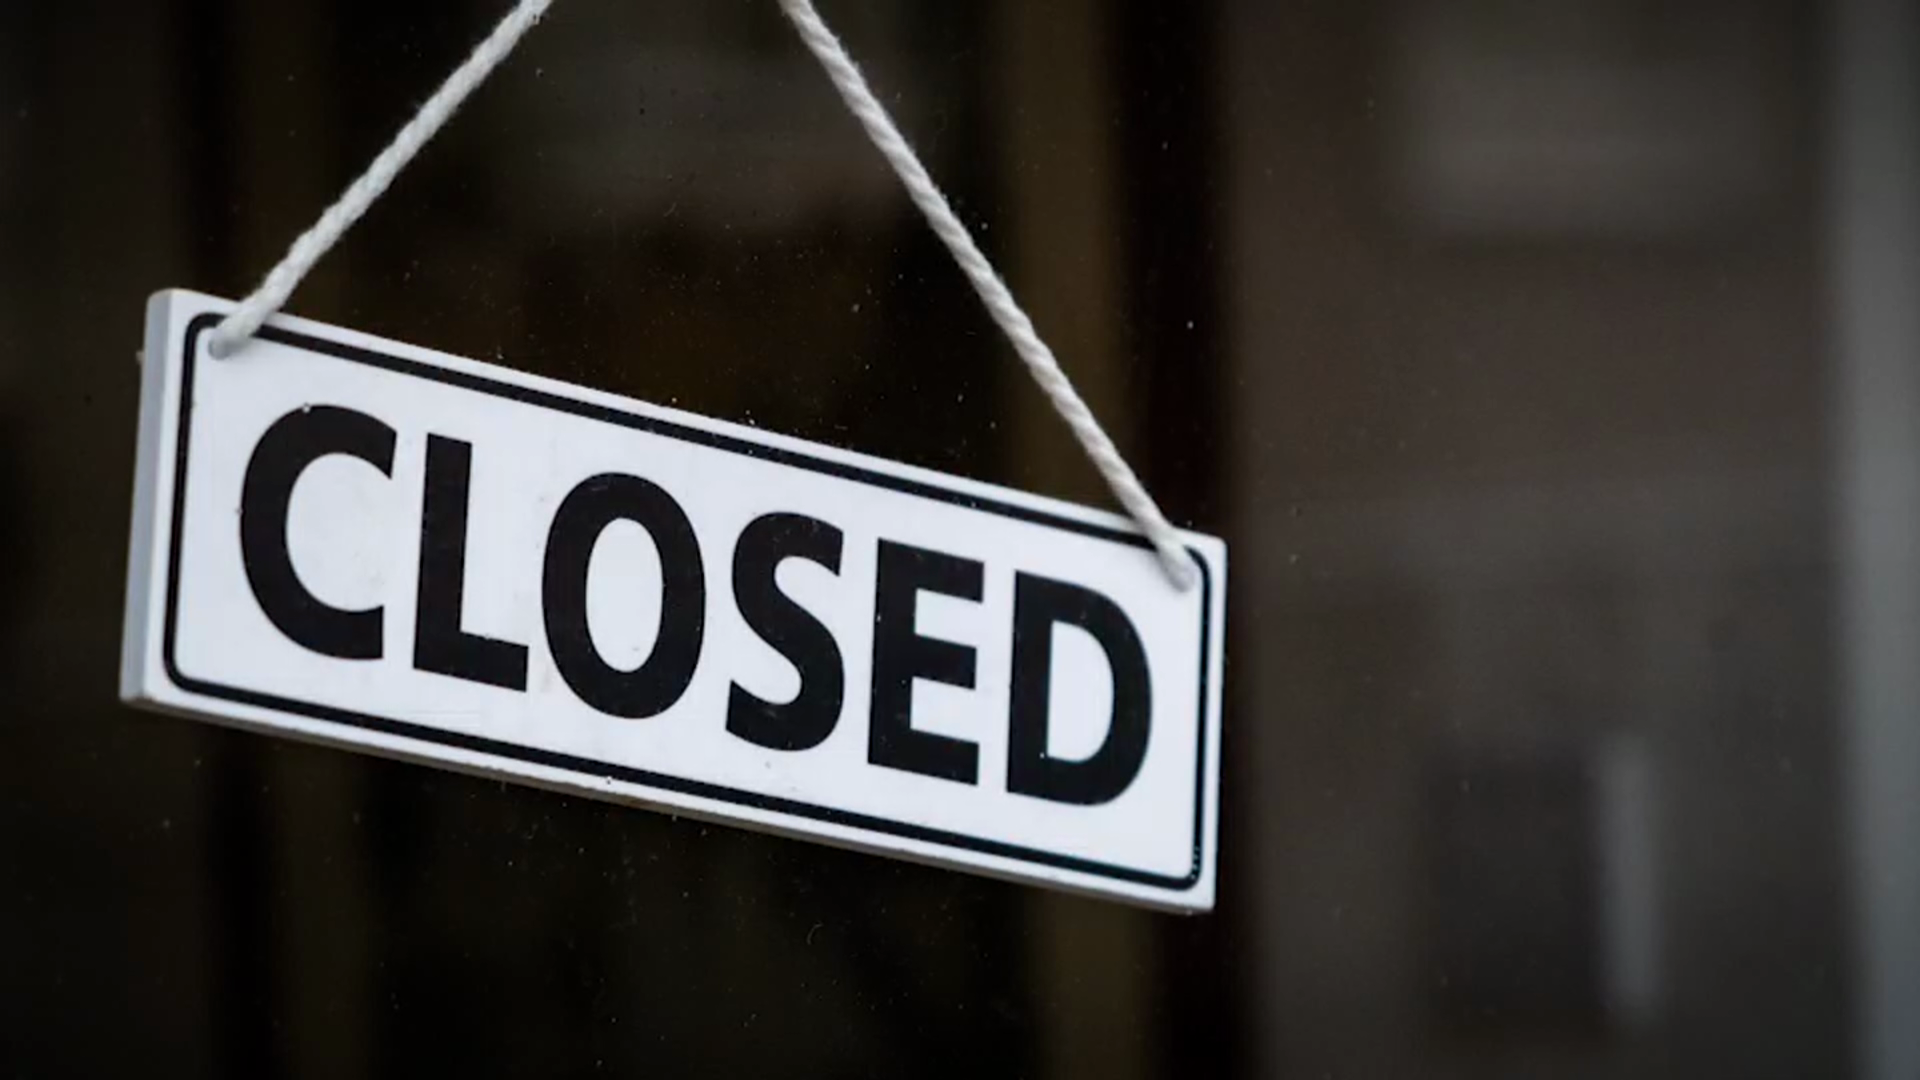 If a business suddenly closes, what can consumers do? – NBC 5